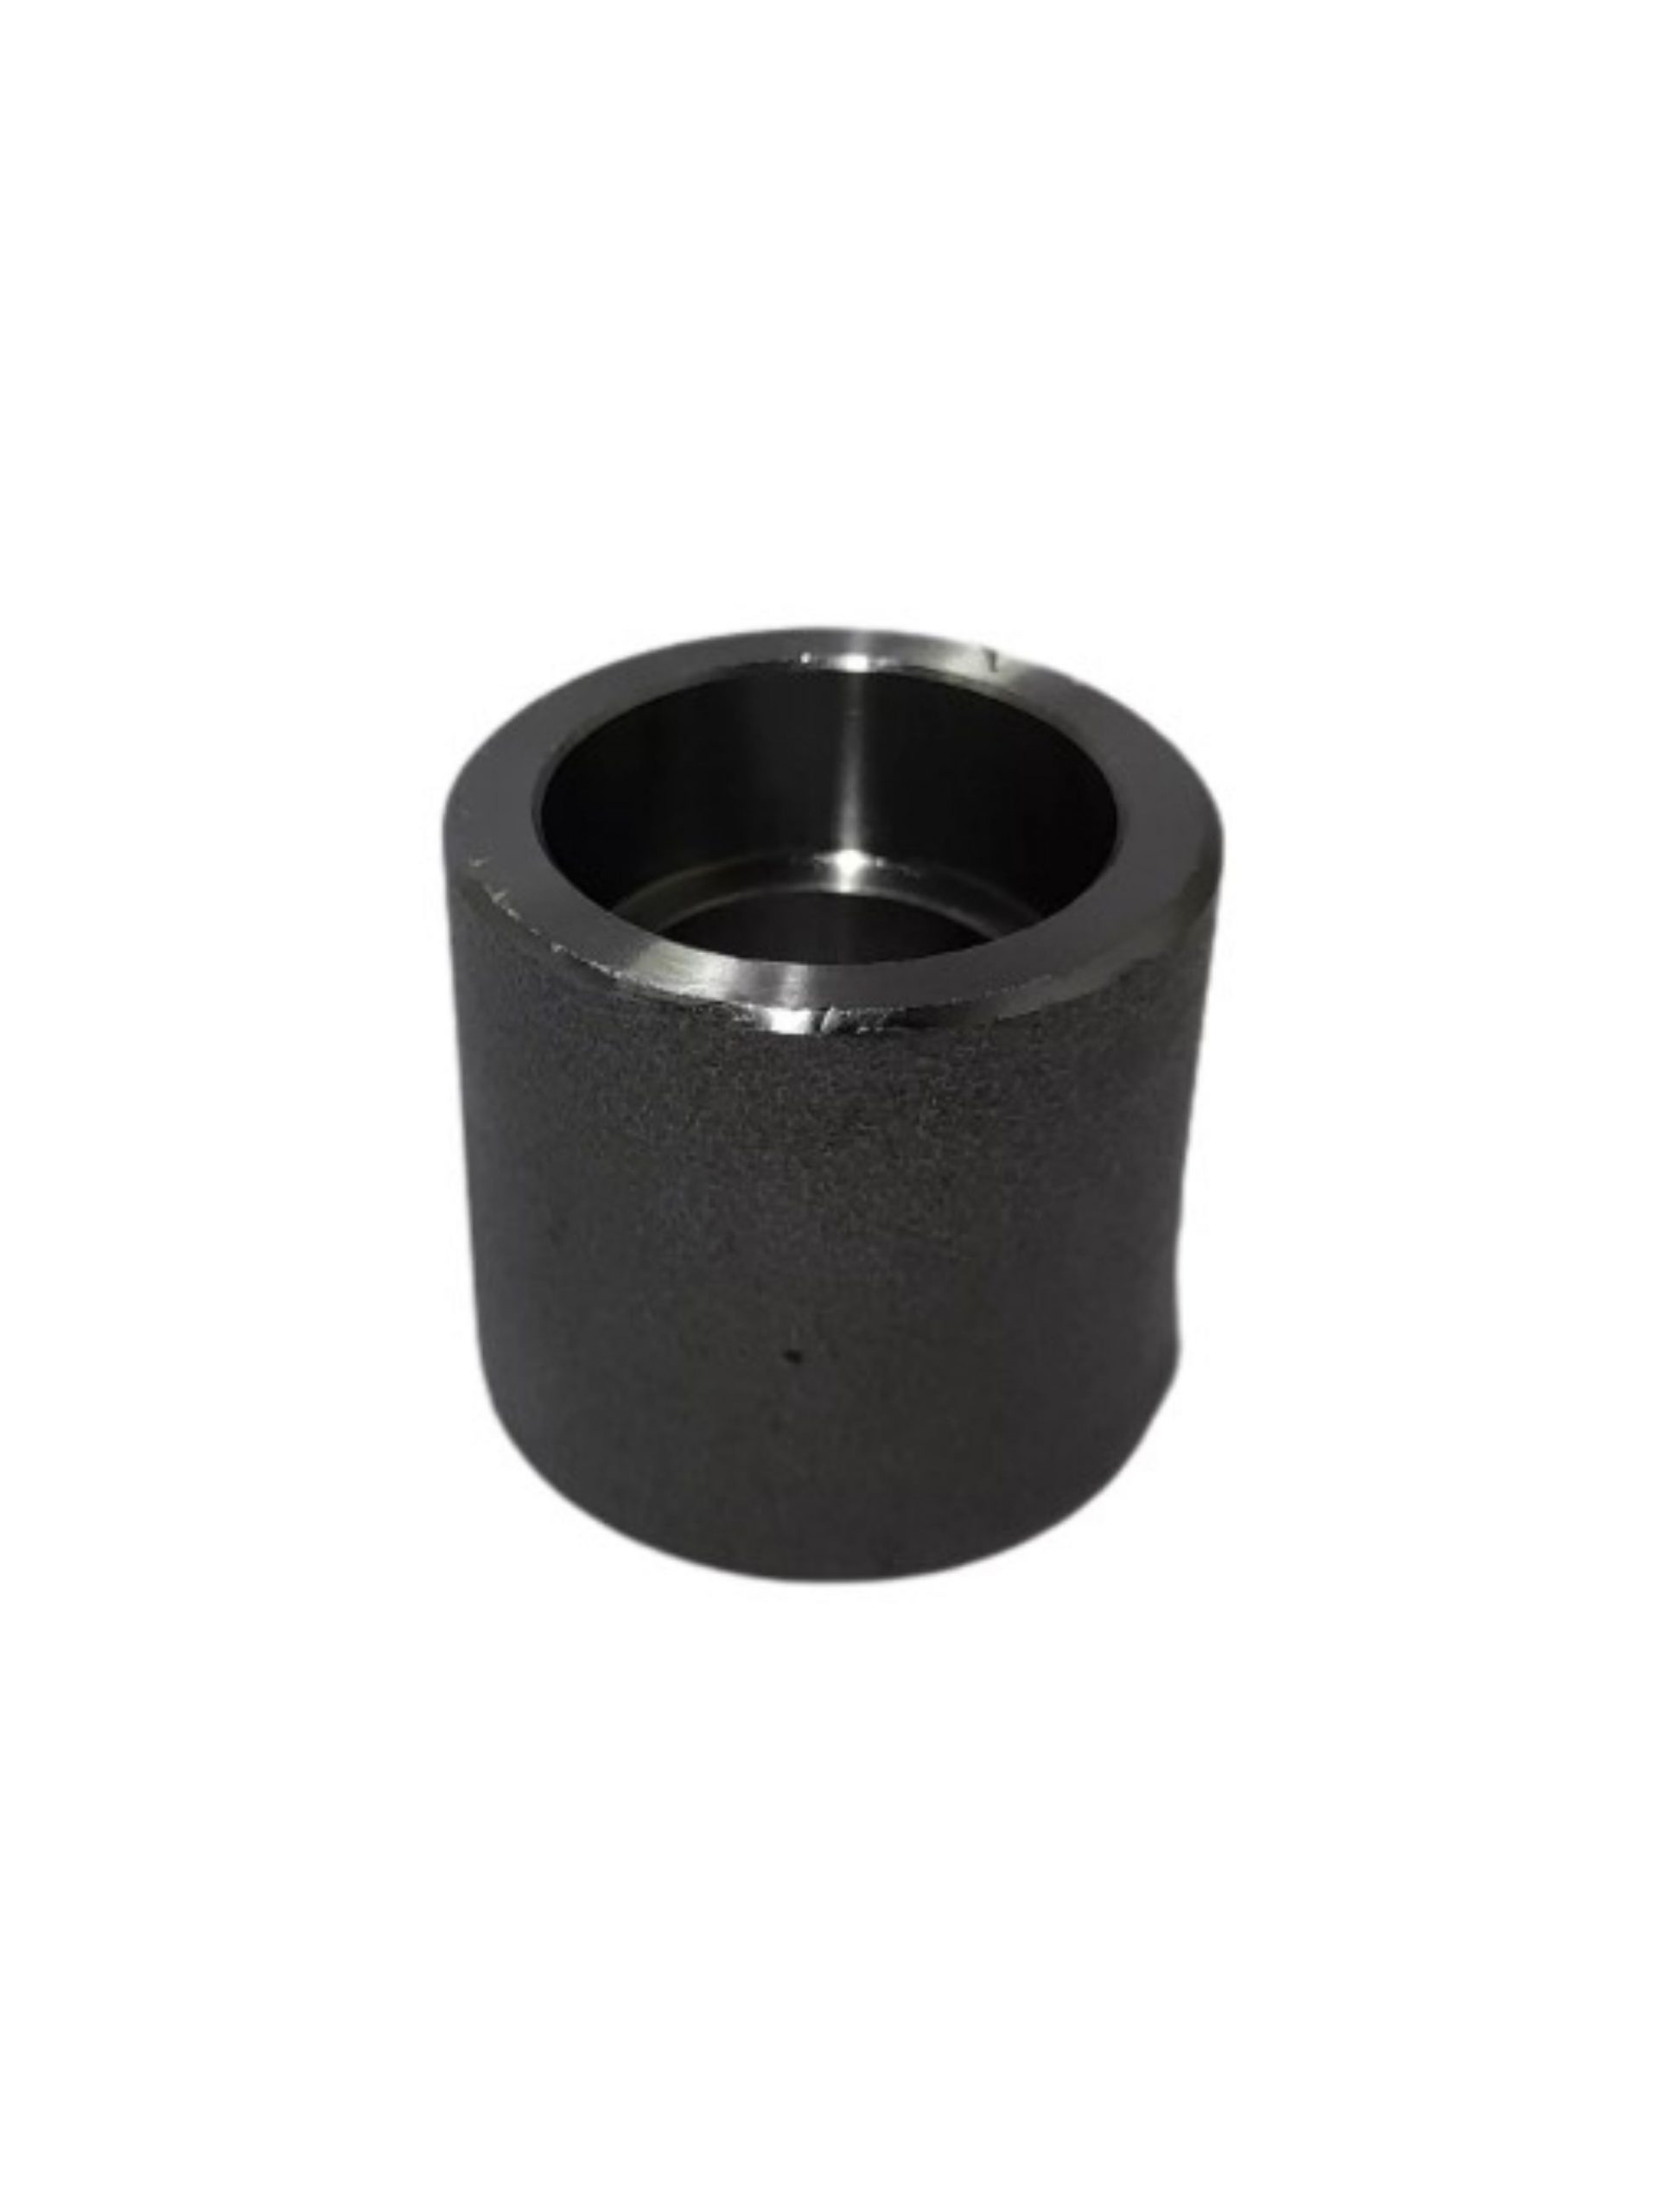 SOCKET WELDED  COUPLING 1 Inches CLASS 3000 from Gas Equipment Company Llc Abu Dhabi, UNITED ARAB EMIRATES